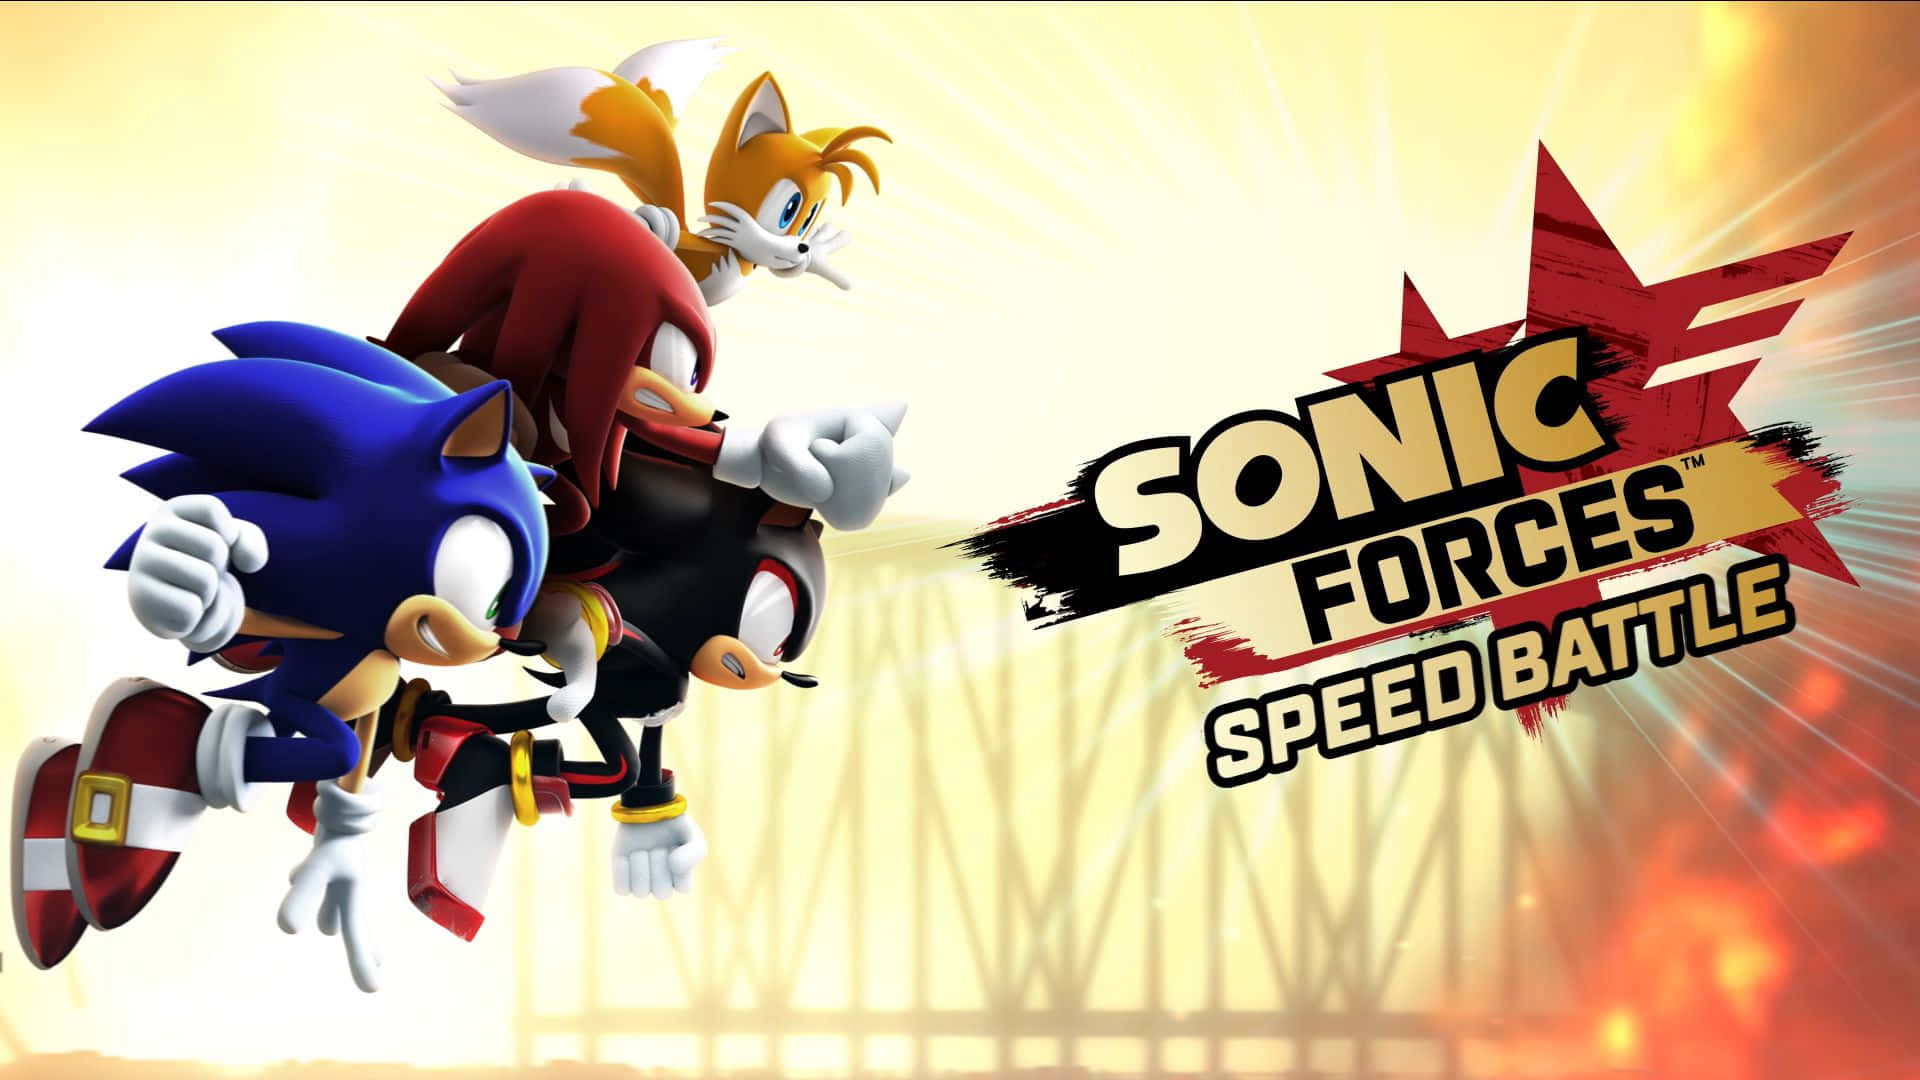 Intense Action in Sonic Forces Speed Battle! Wallpaper